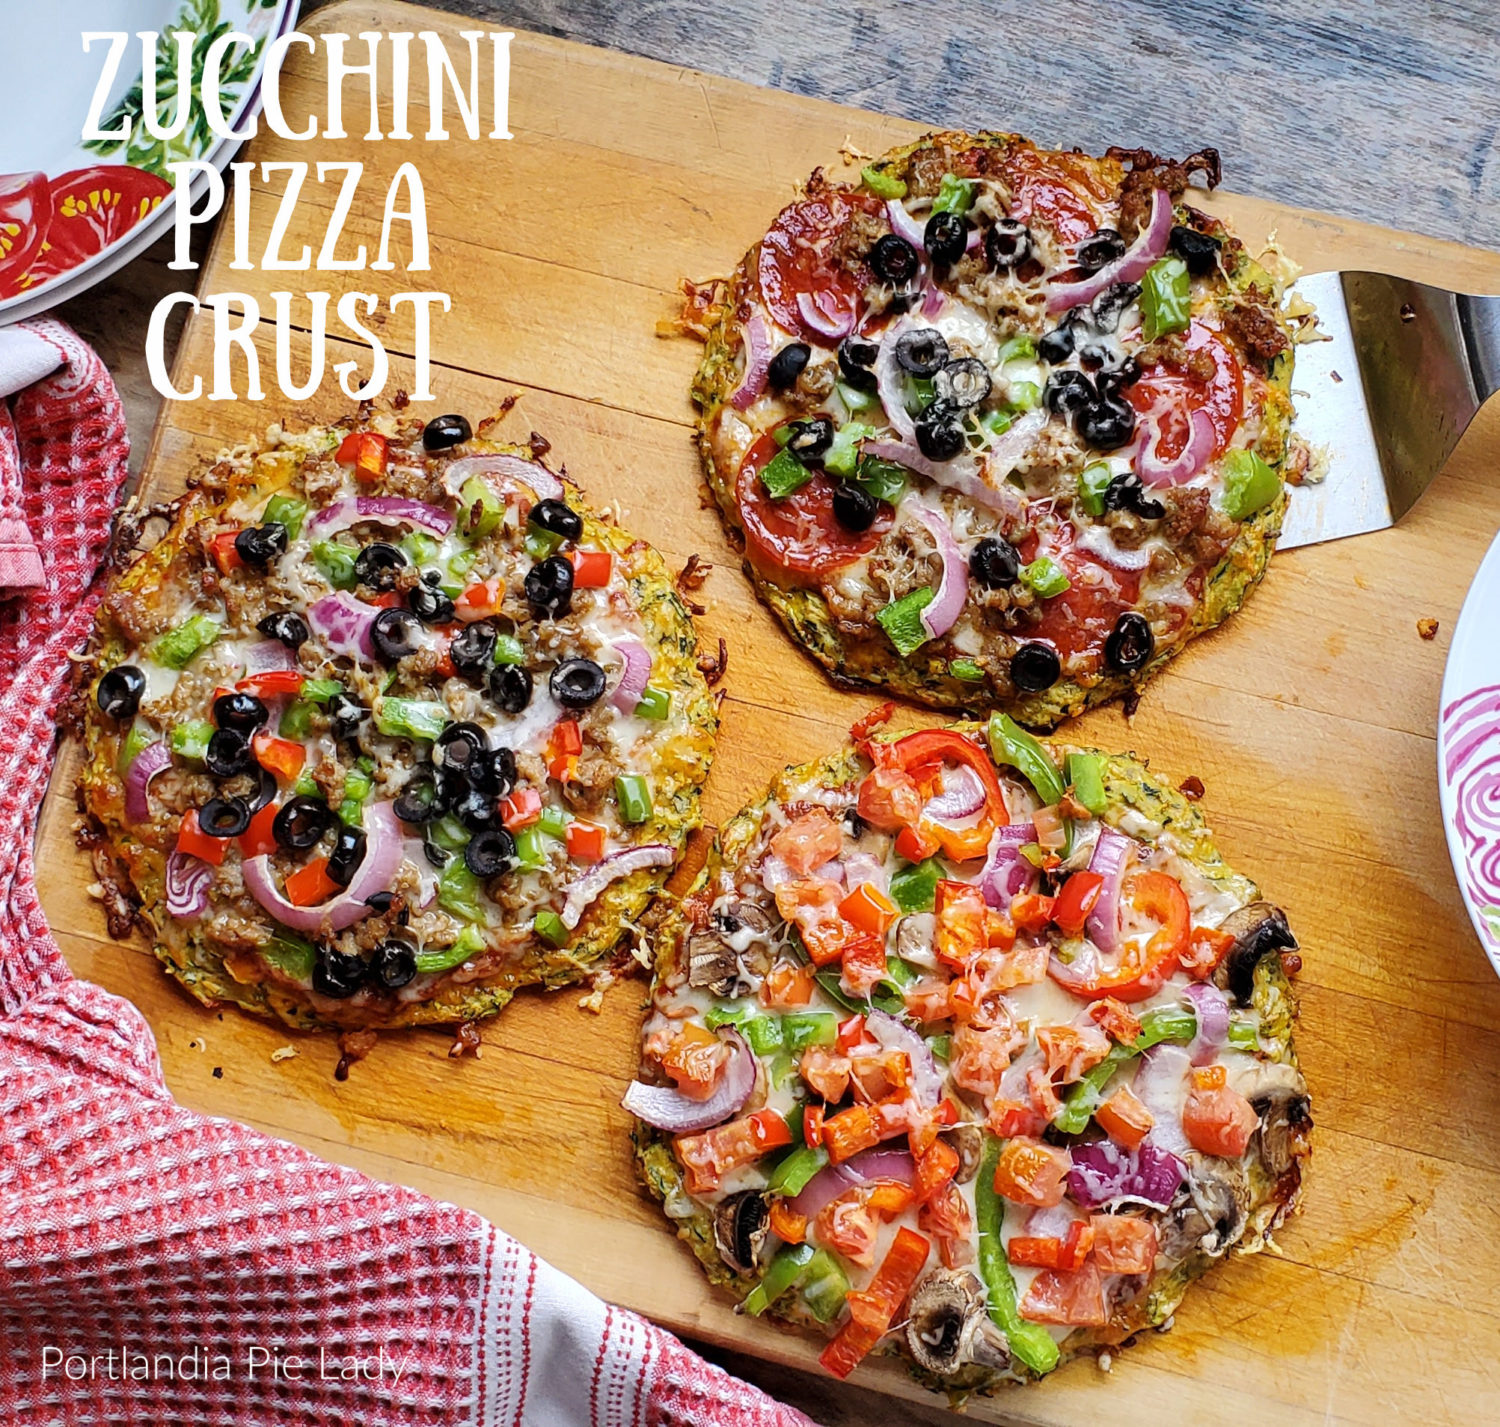 Zucchini Pizza Crust: Super tasty yet low carb, vegetarian, easy to make dairy free and gluten free; a pizza crust for the entire world.